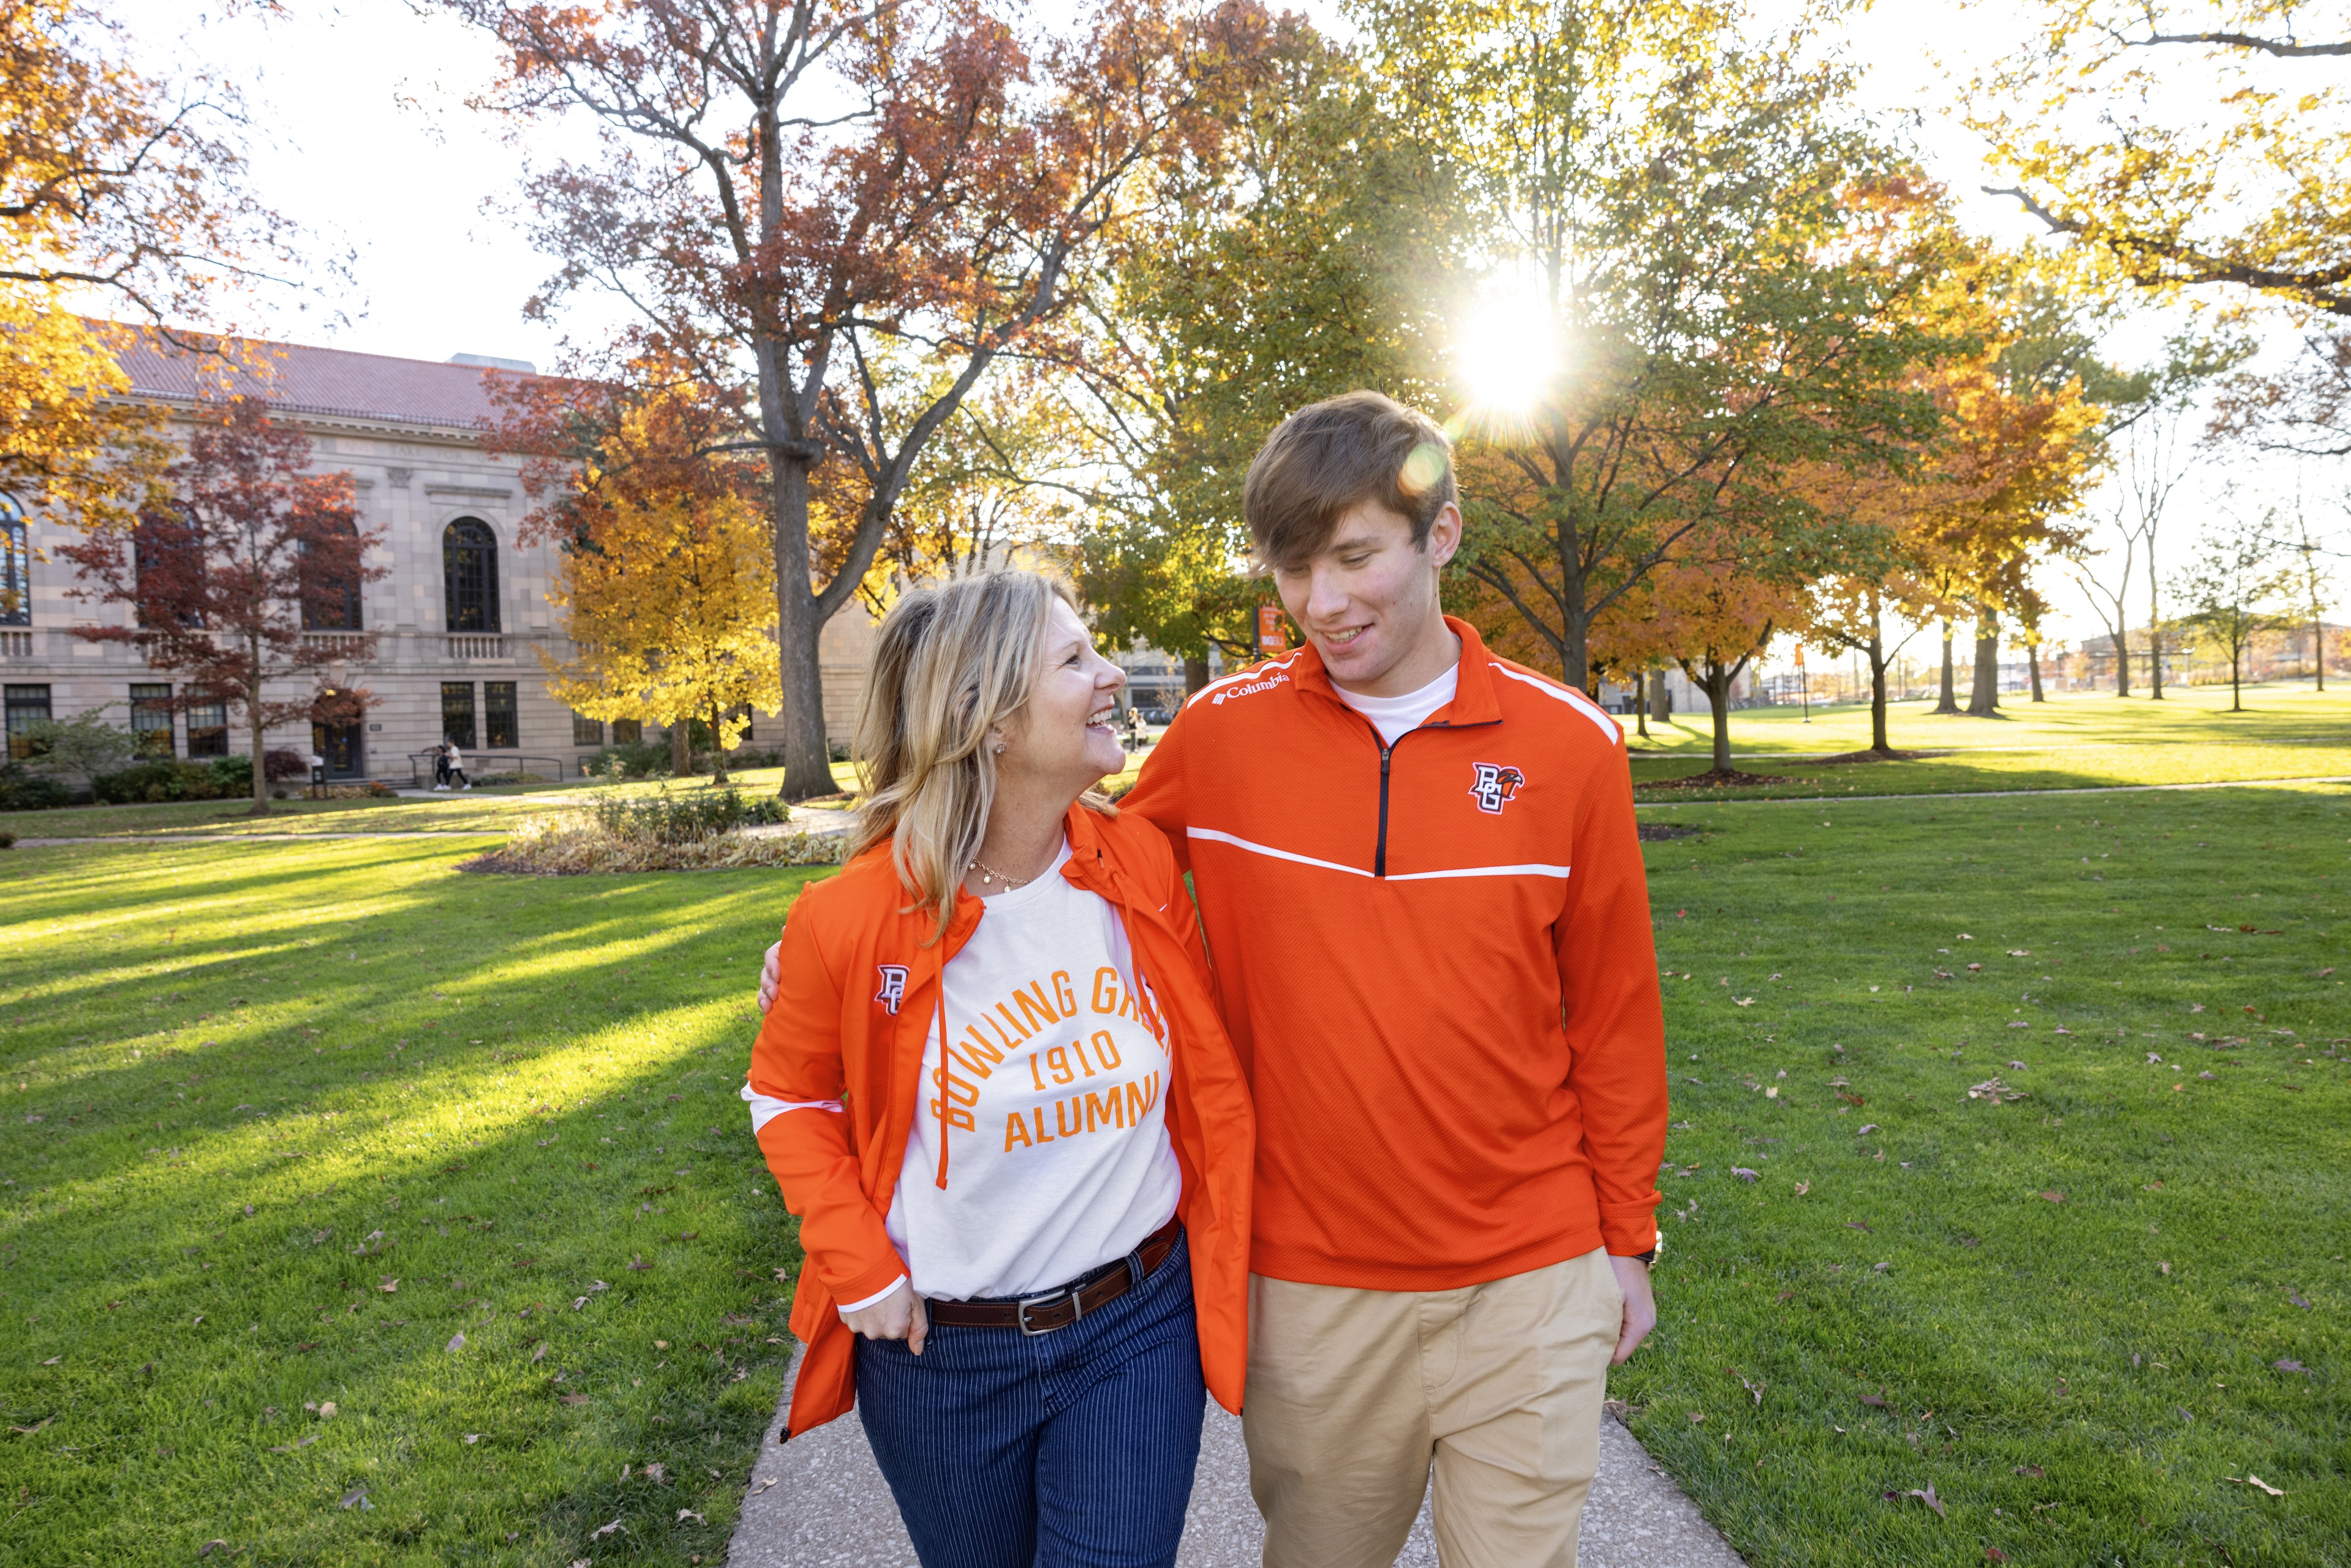 Tricia and Andrew Maasel walk through campus on a sunny fall day.